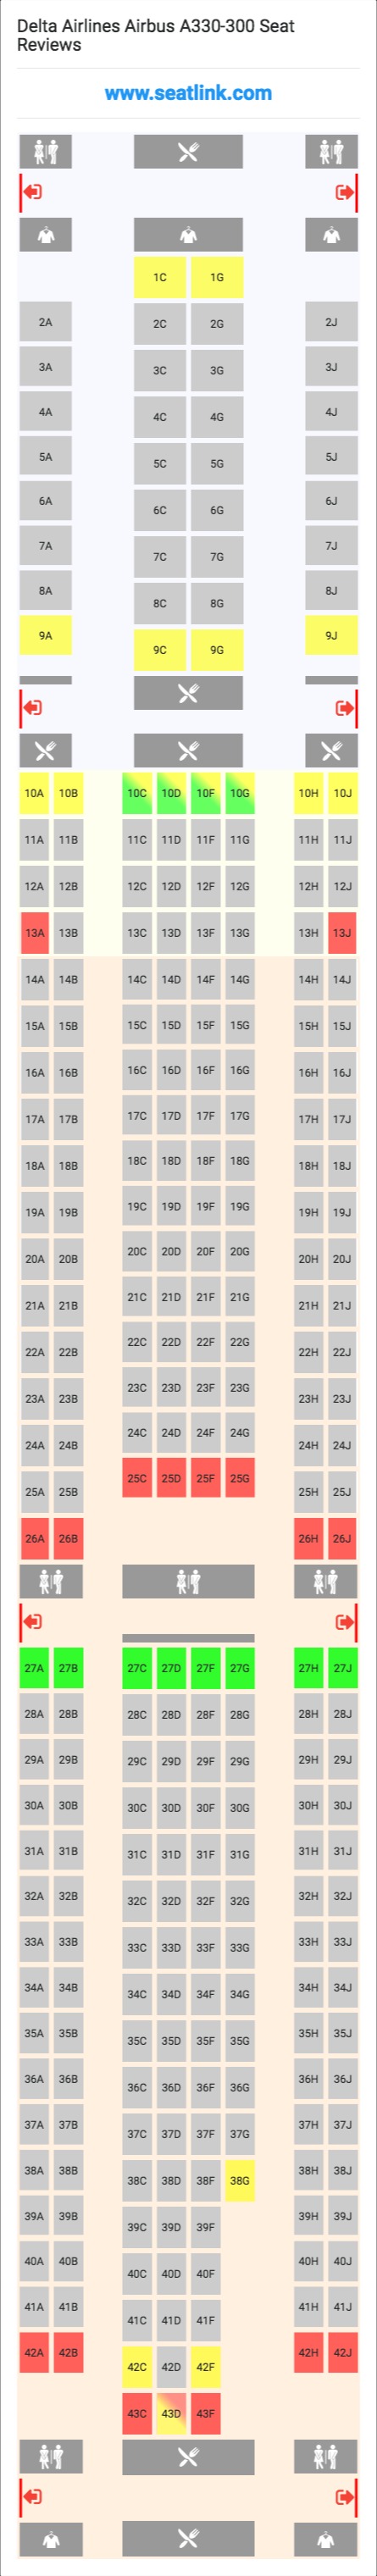 Delta Airlines Airbus A330-300 (333) Seat Map